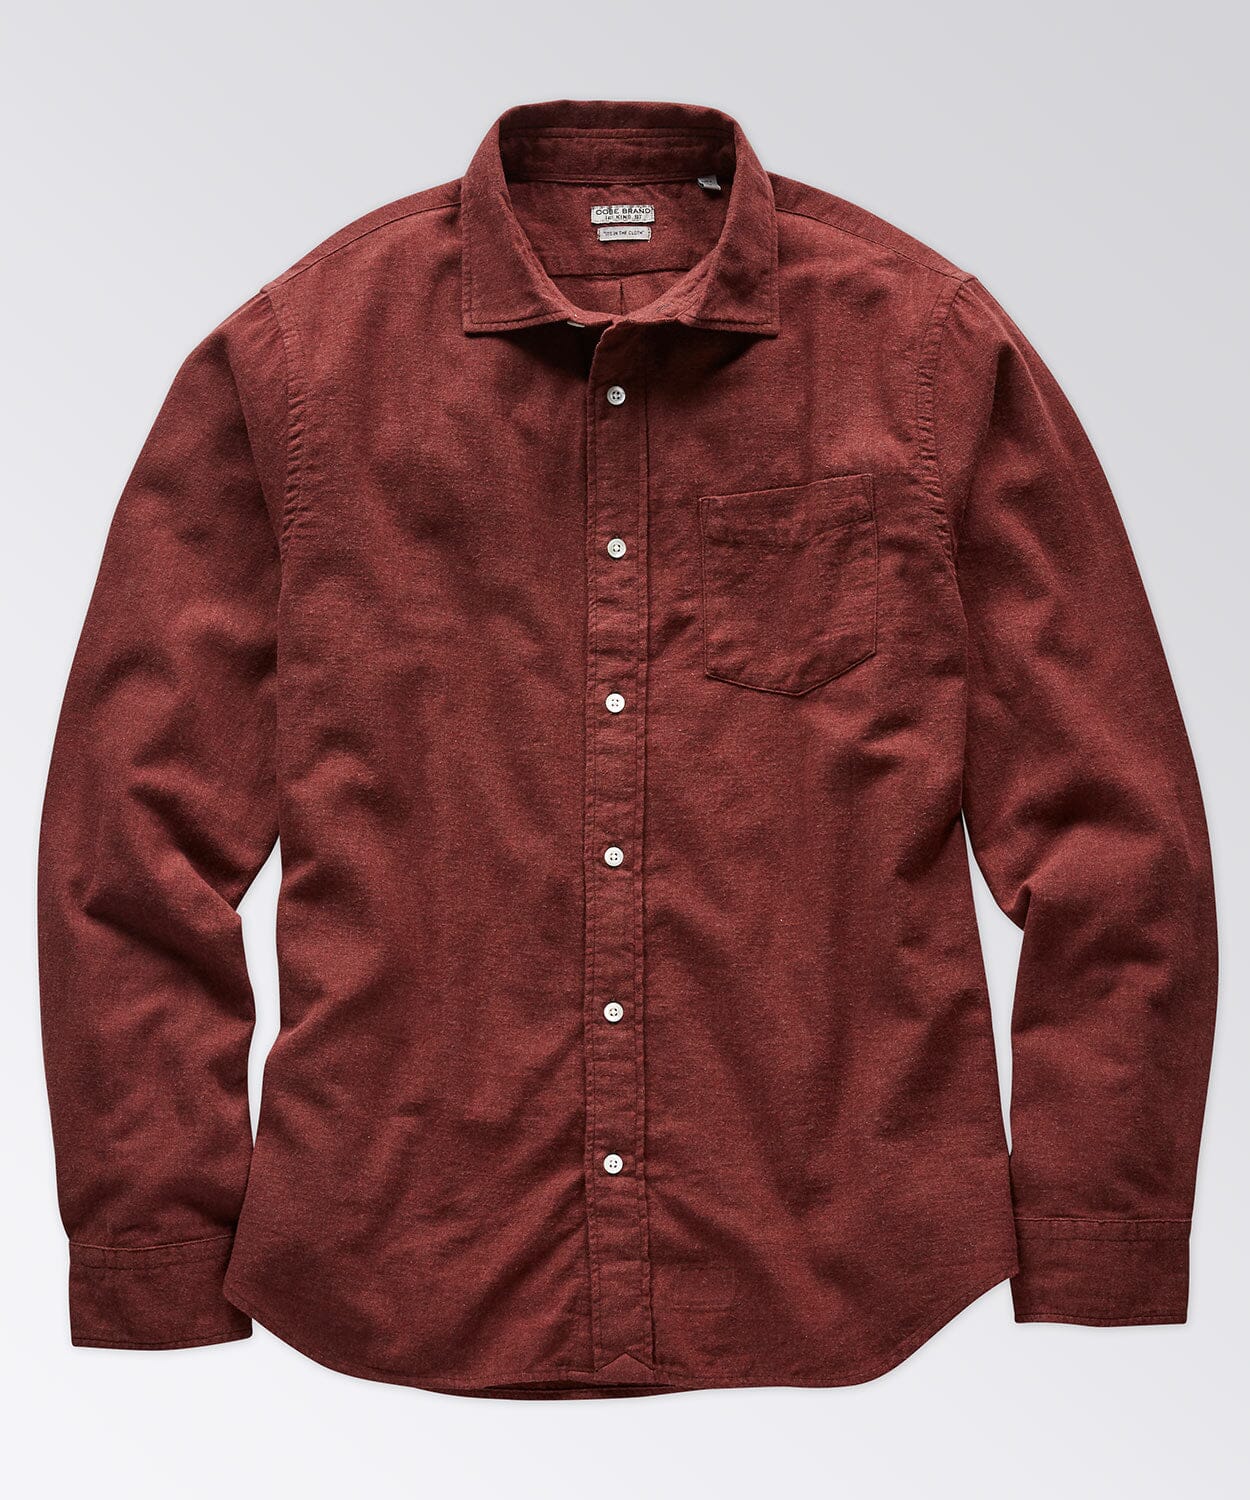 Excella Brushed Heather Solid Shirt Button Downs OOBE BRAND Red Heather S 